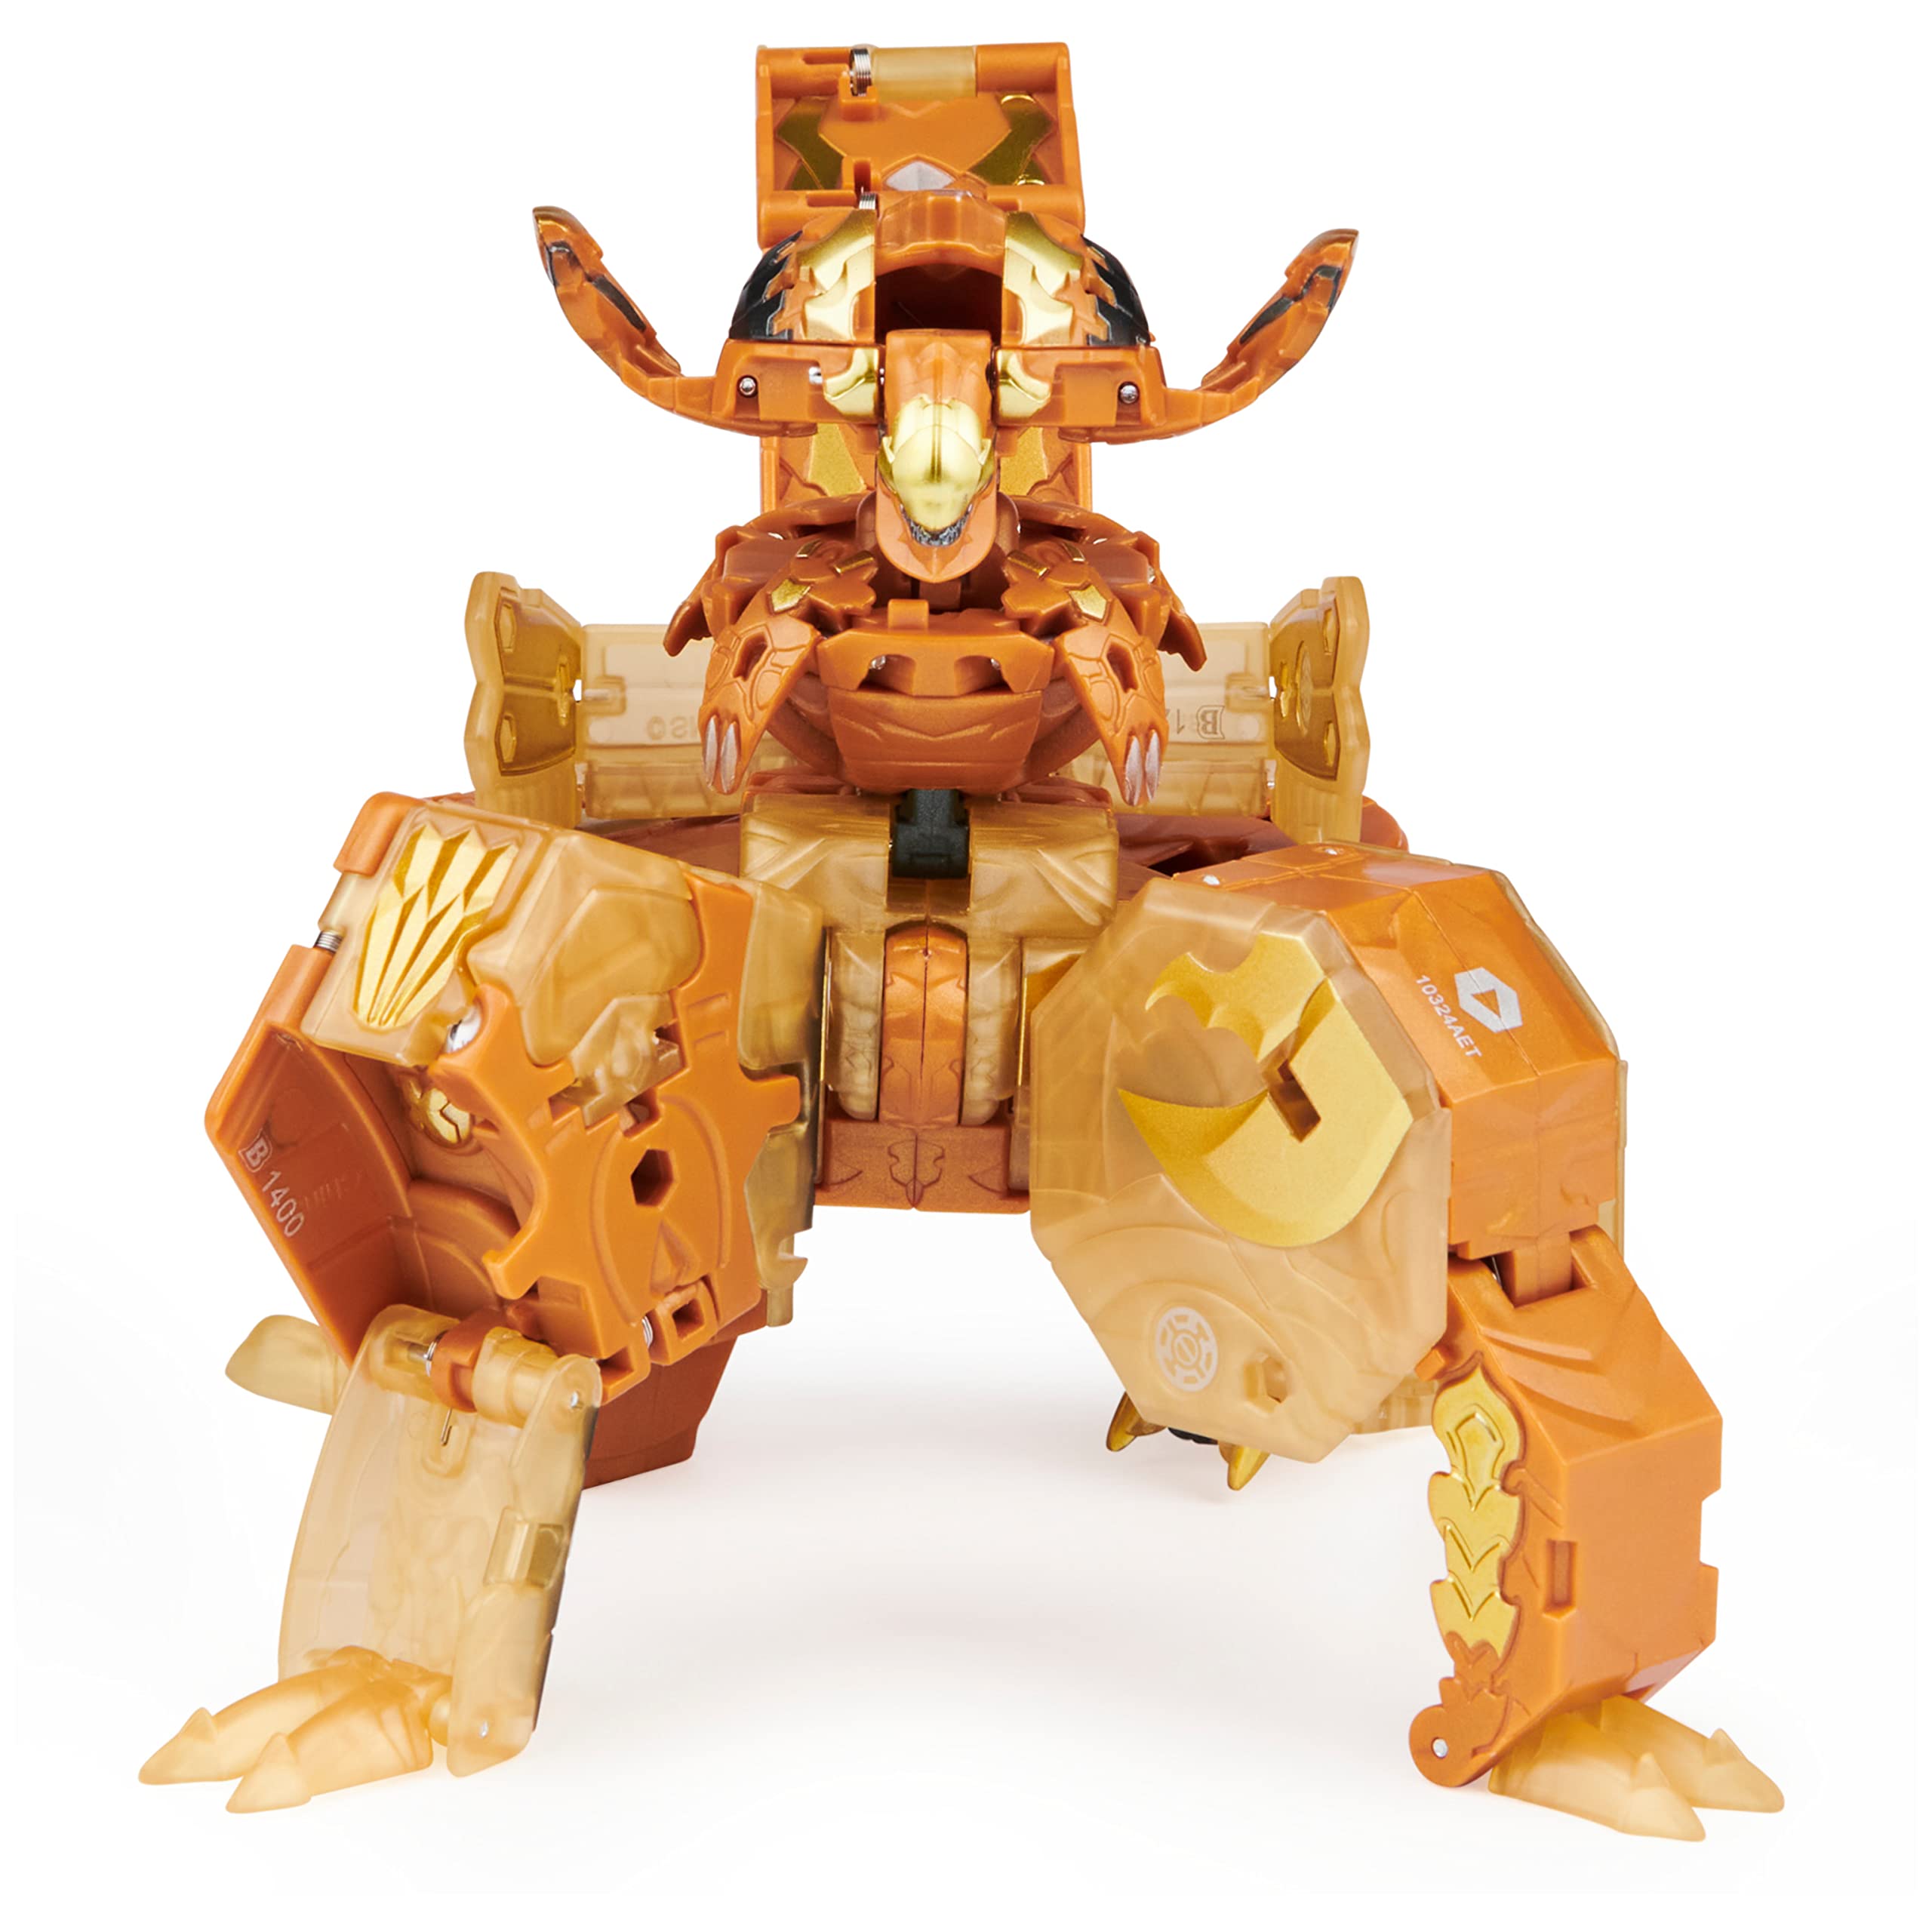 Bakugan Ultimate Viloch, 7-in-1 Exclusive Bakugan, Includes BakuCores and Trading Cards, Geogan Rising Collectible Action Figure Kids Toys for Boys